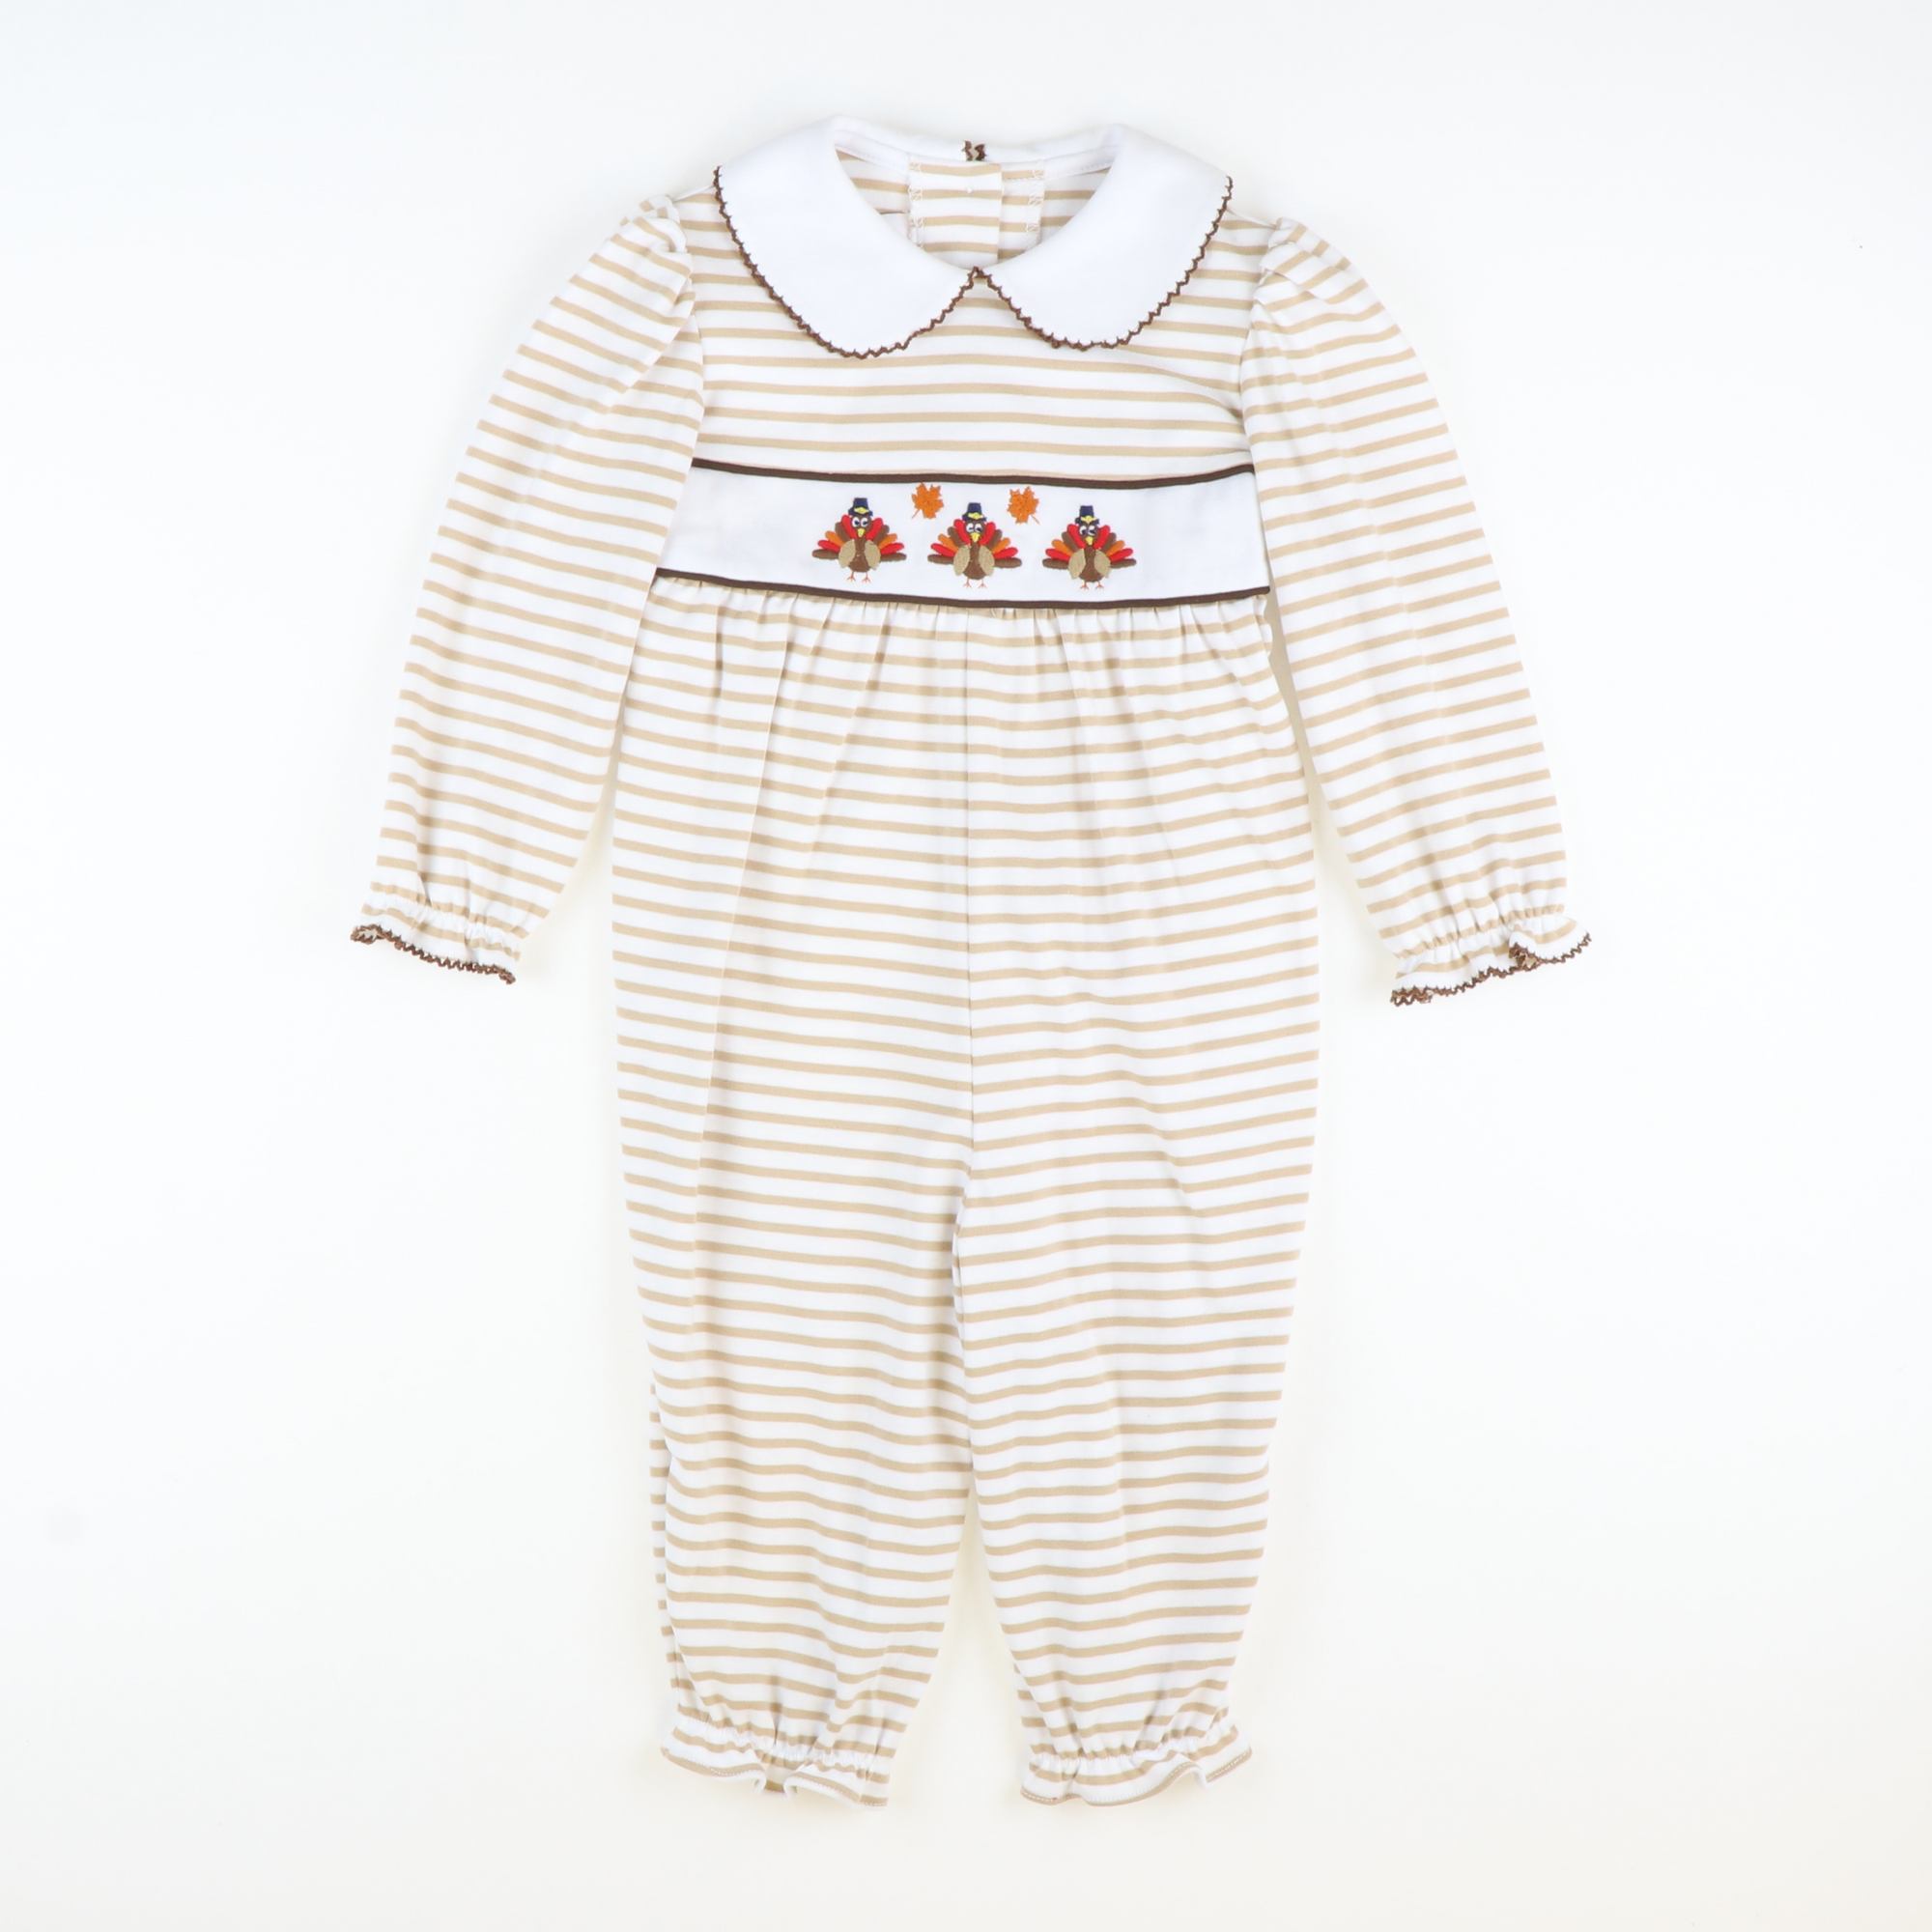 Embroidered Turkeys Collared Girl Long Bubble - Tan Stripe Knit